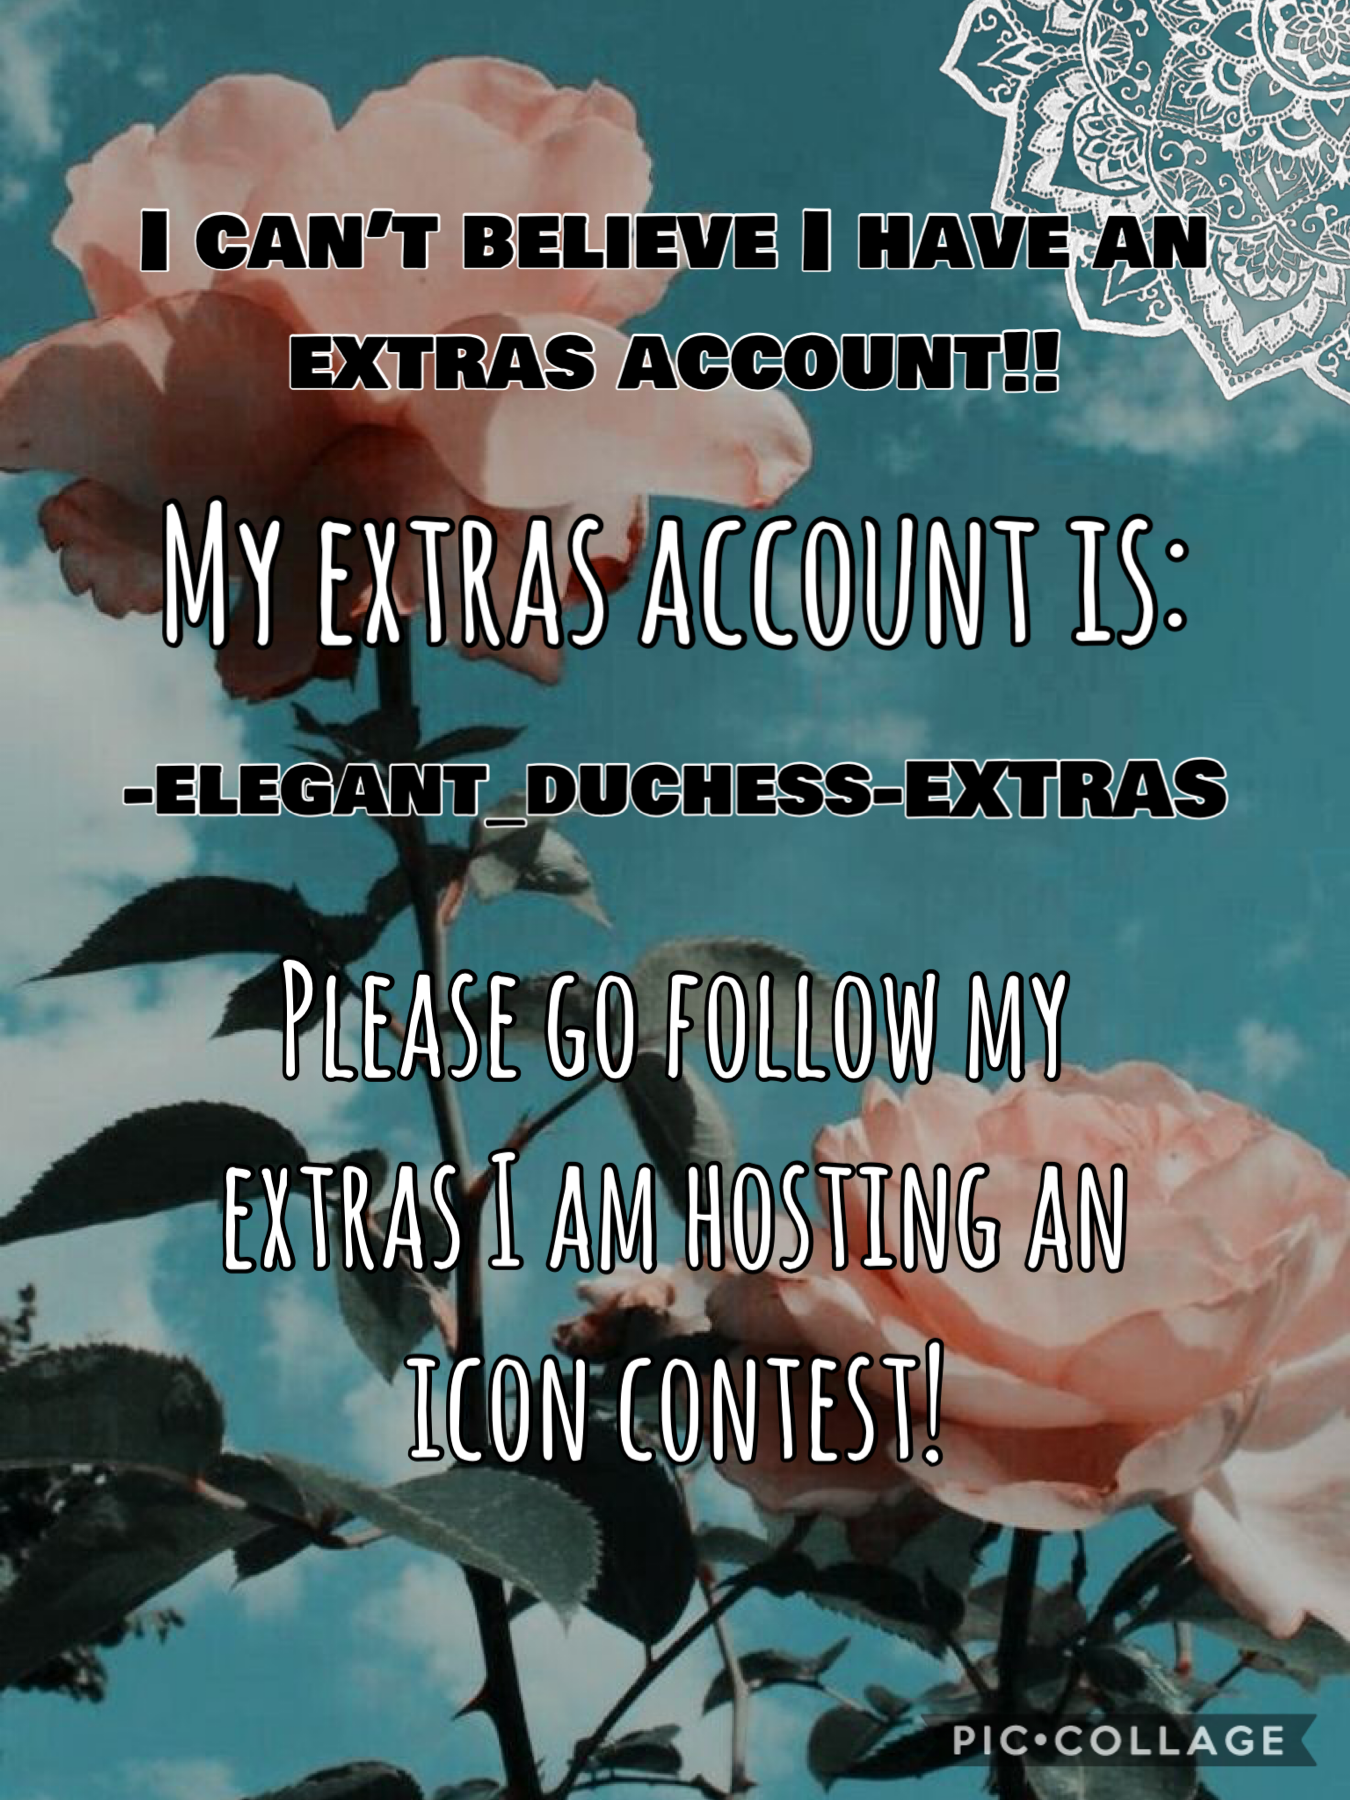 💖🌺Tap🌺💖
Icon Contest
Please go follow!
I’m so excited!!